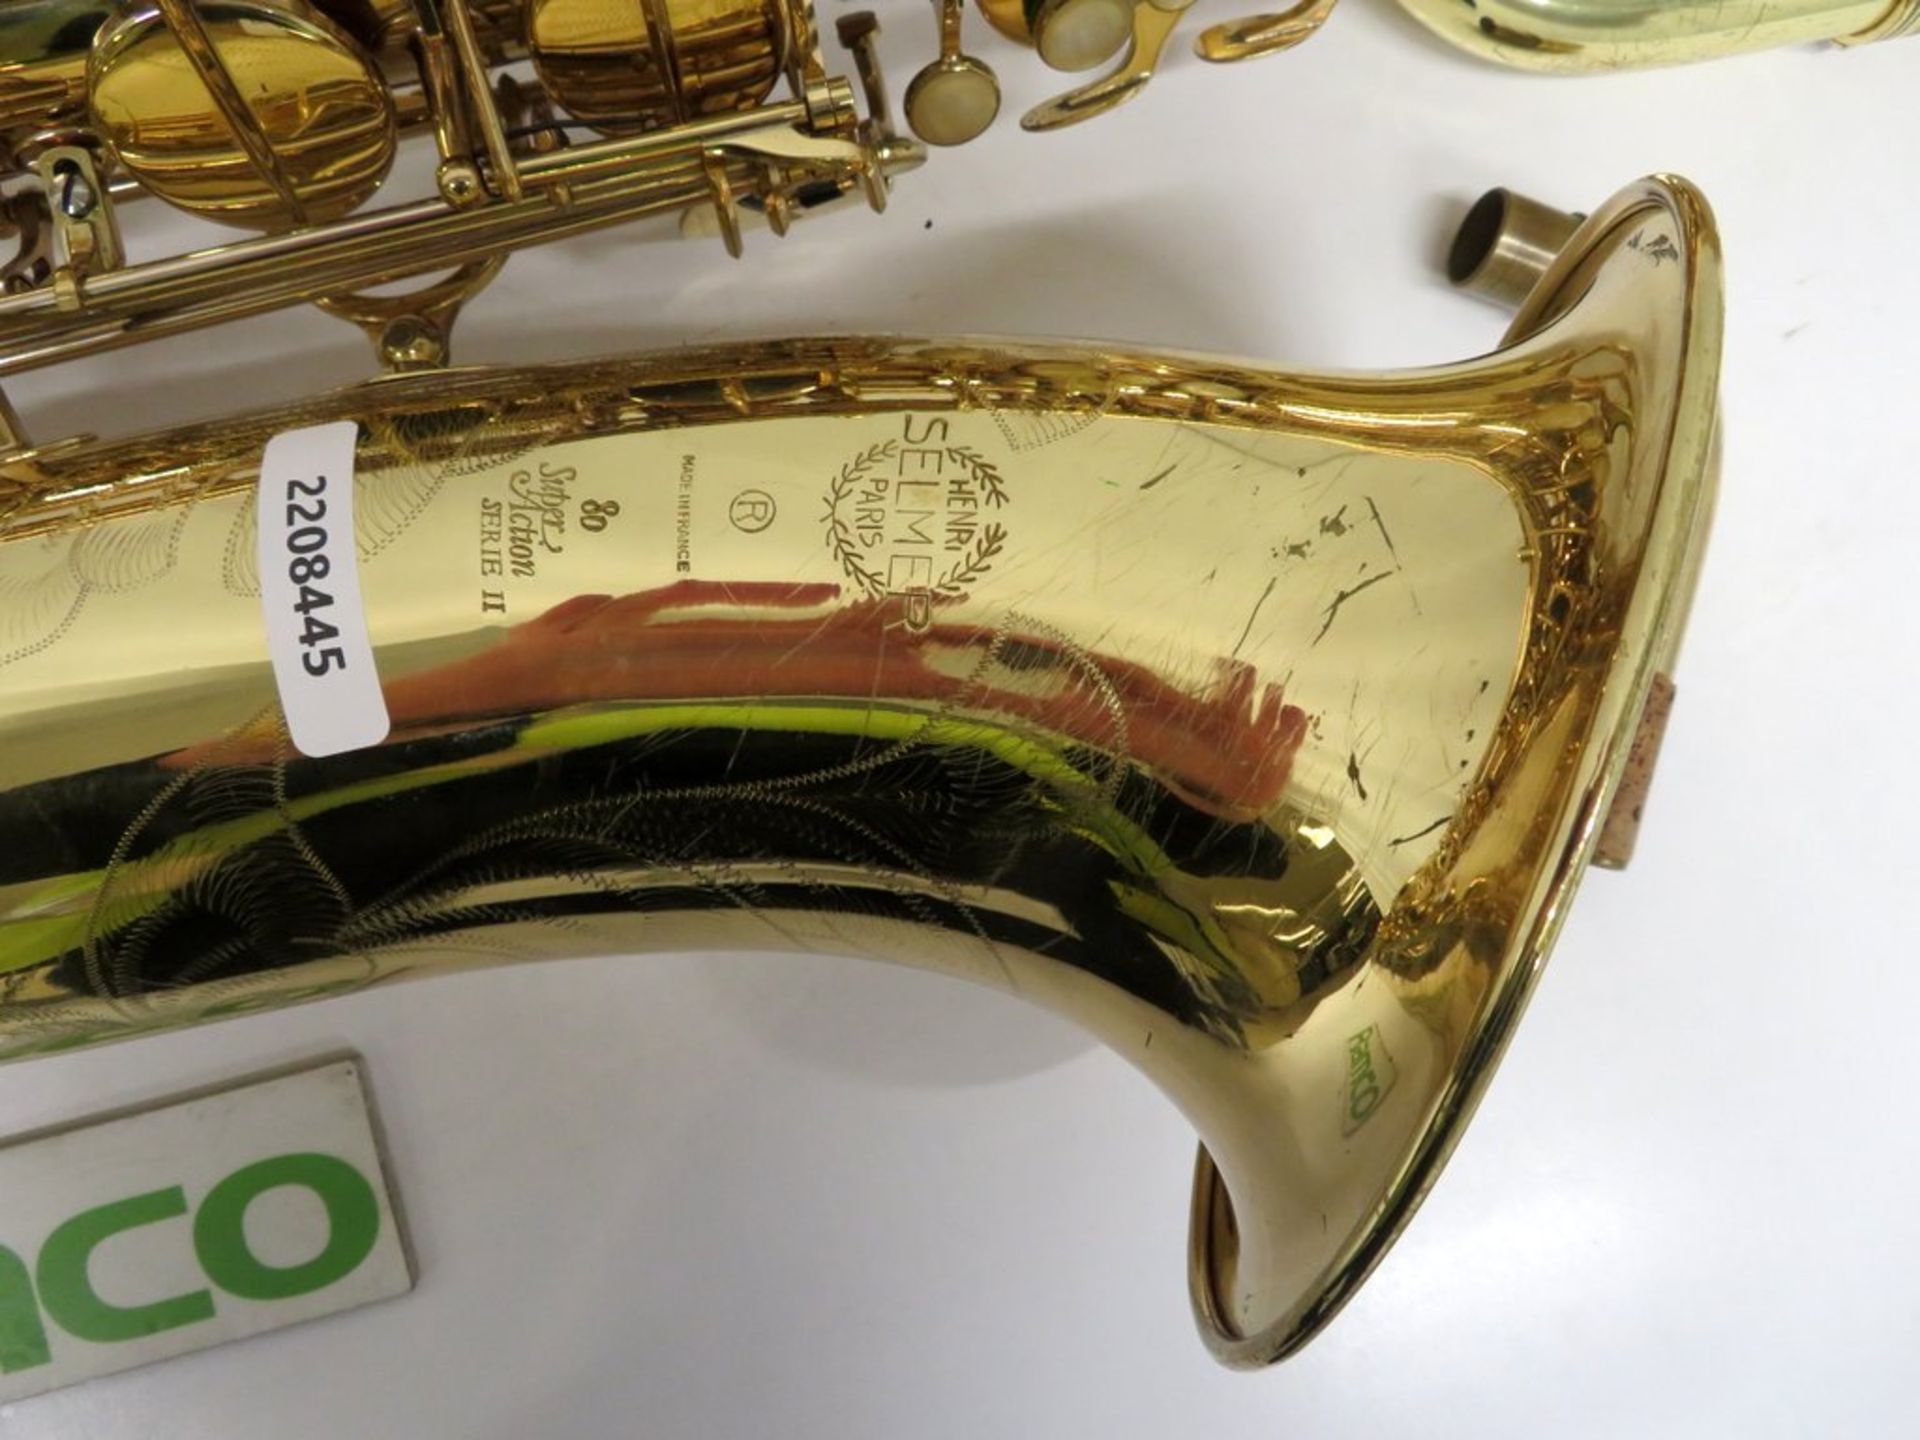 Henri Selmer Super Action 80 Serie 2 Baritone Saxophone With Case. Serial Number: N527543. - Image 4 of 19